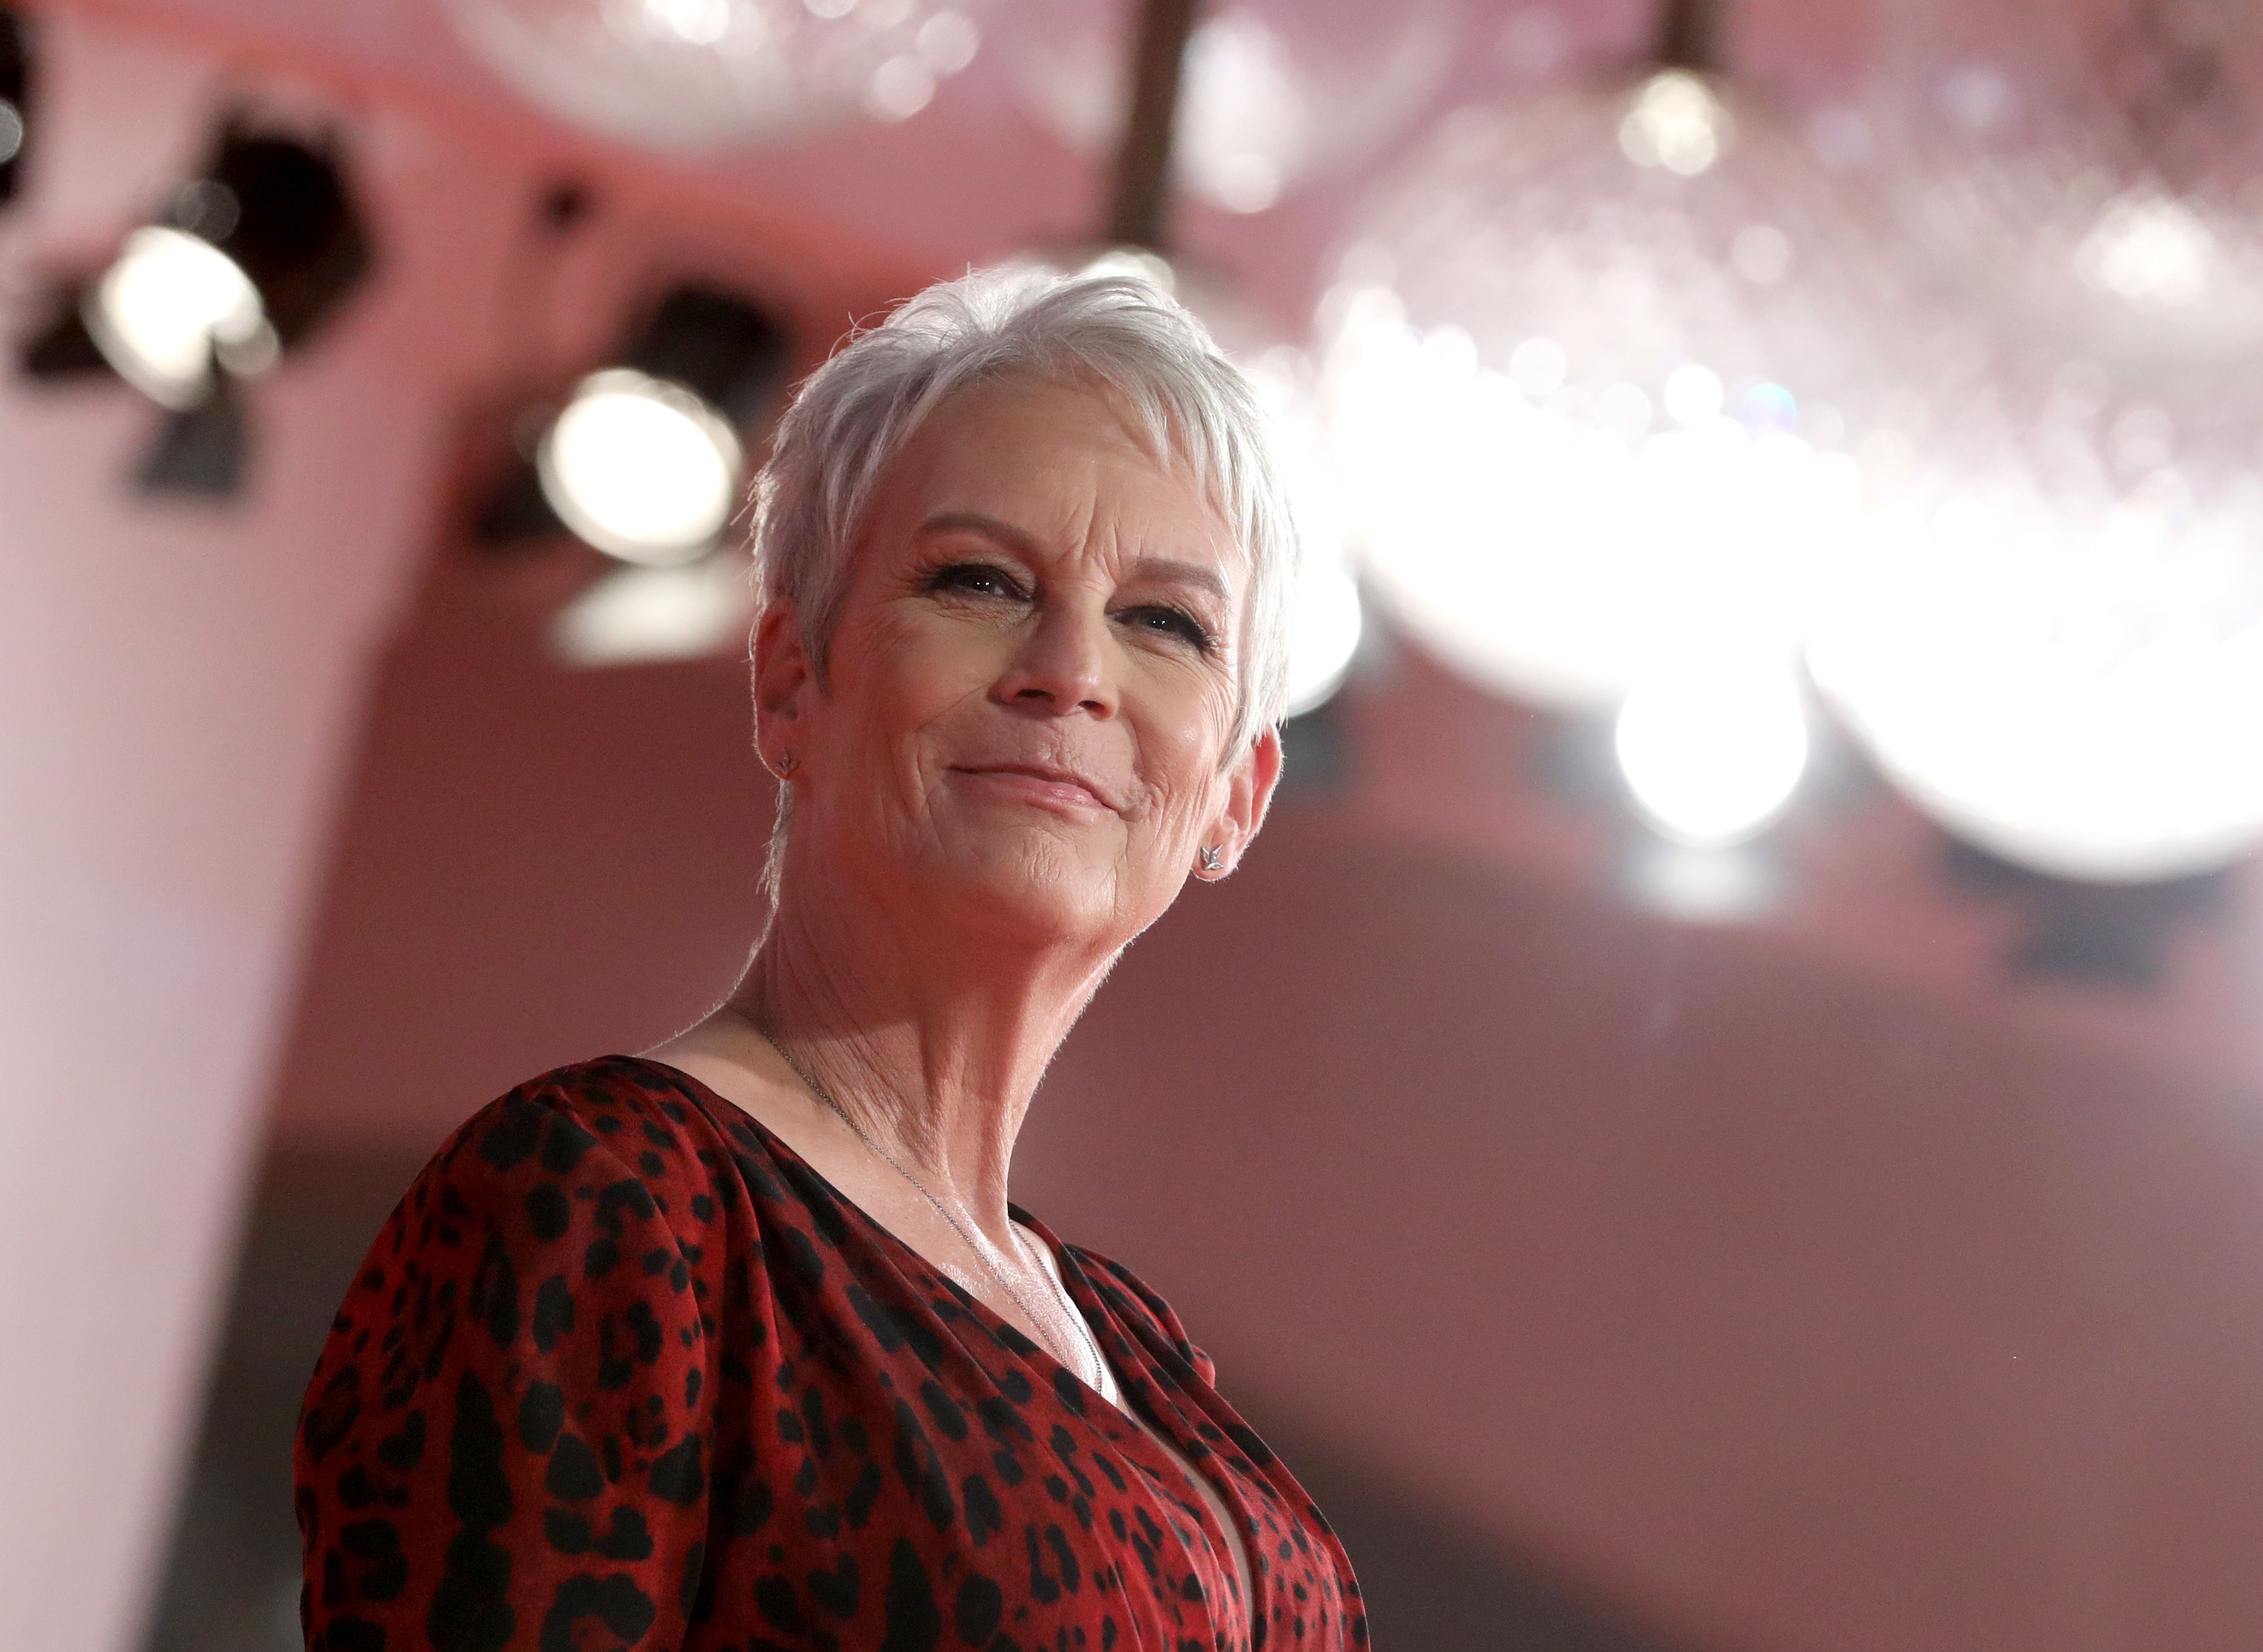 Jamie Lee Curtis shines under the spotlight at the Venice Film Festival to promote the new Halloween movie, Halloween Kills before it premieres in America